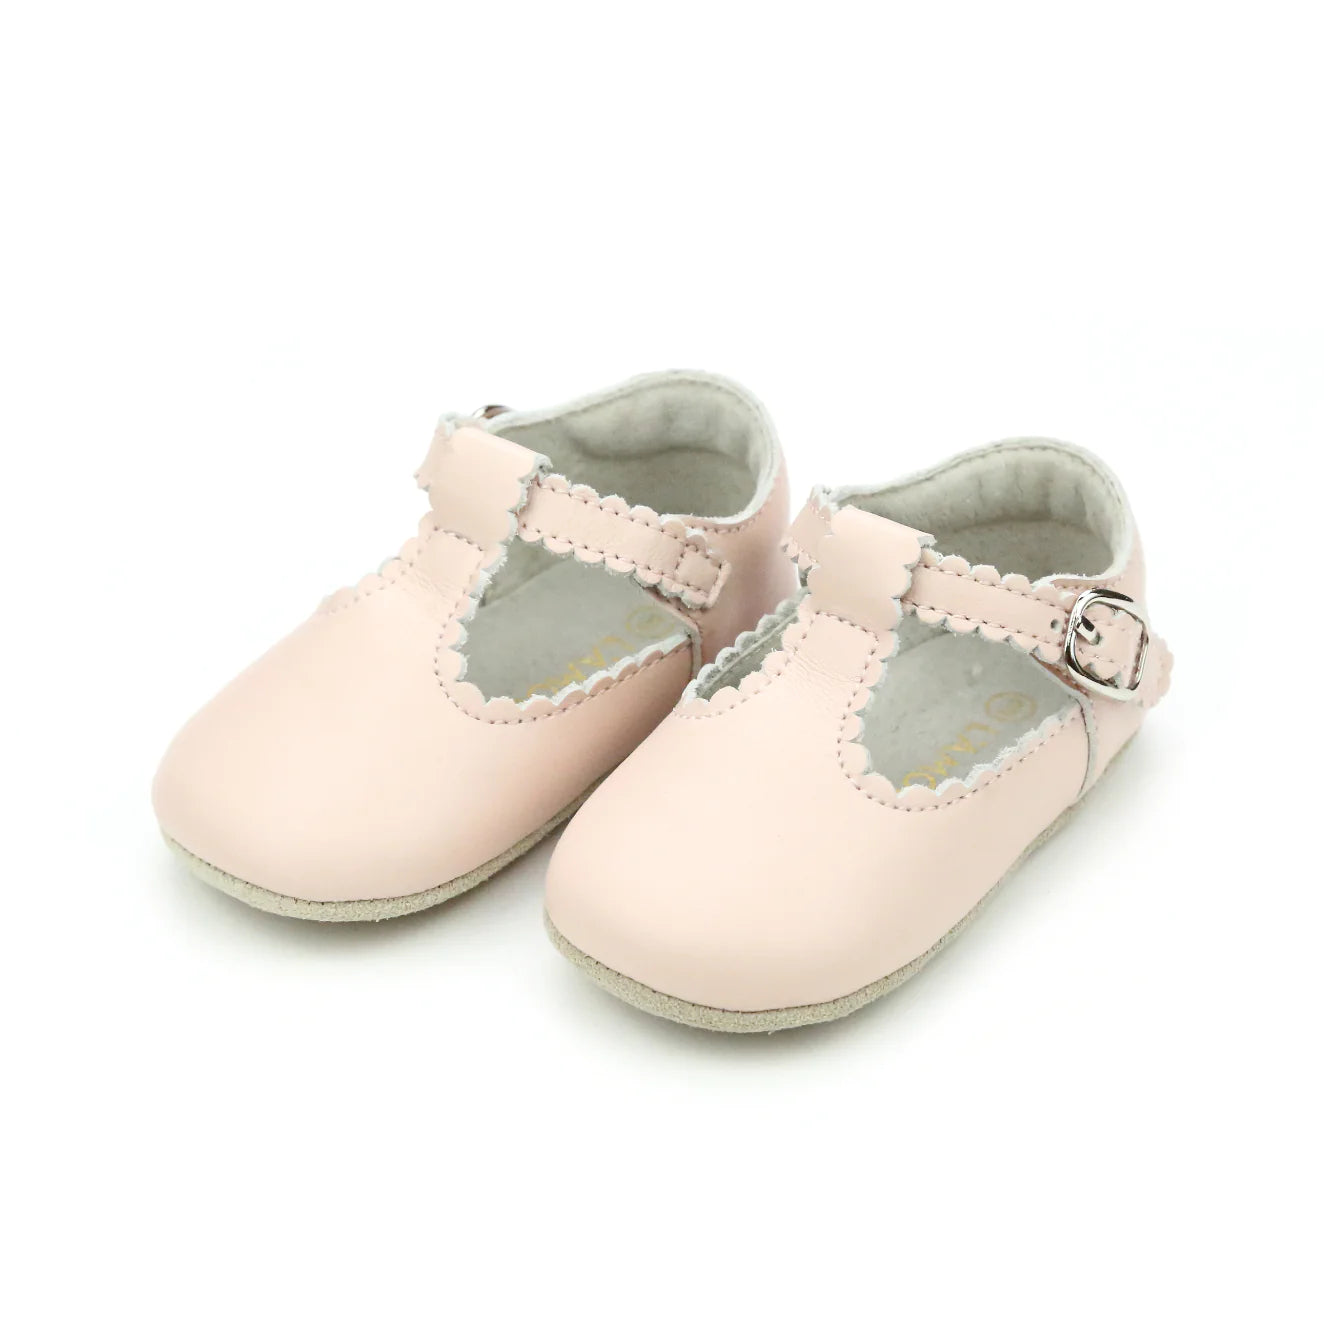 L'Amour - Elodie Scalloped Crib Mary Jane Pink